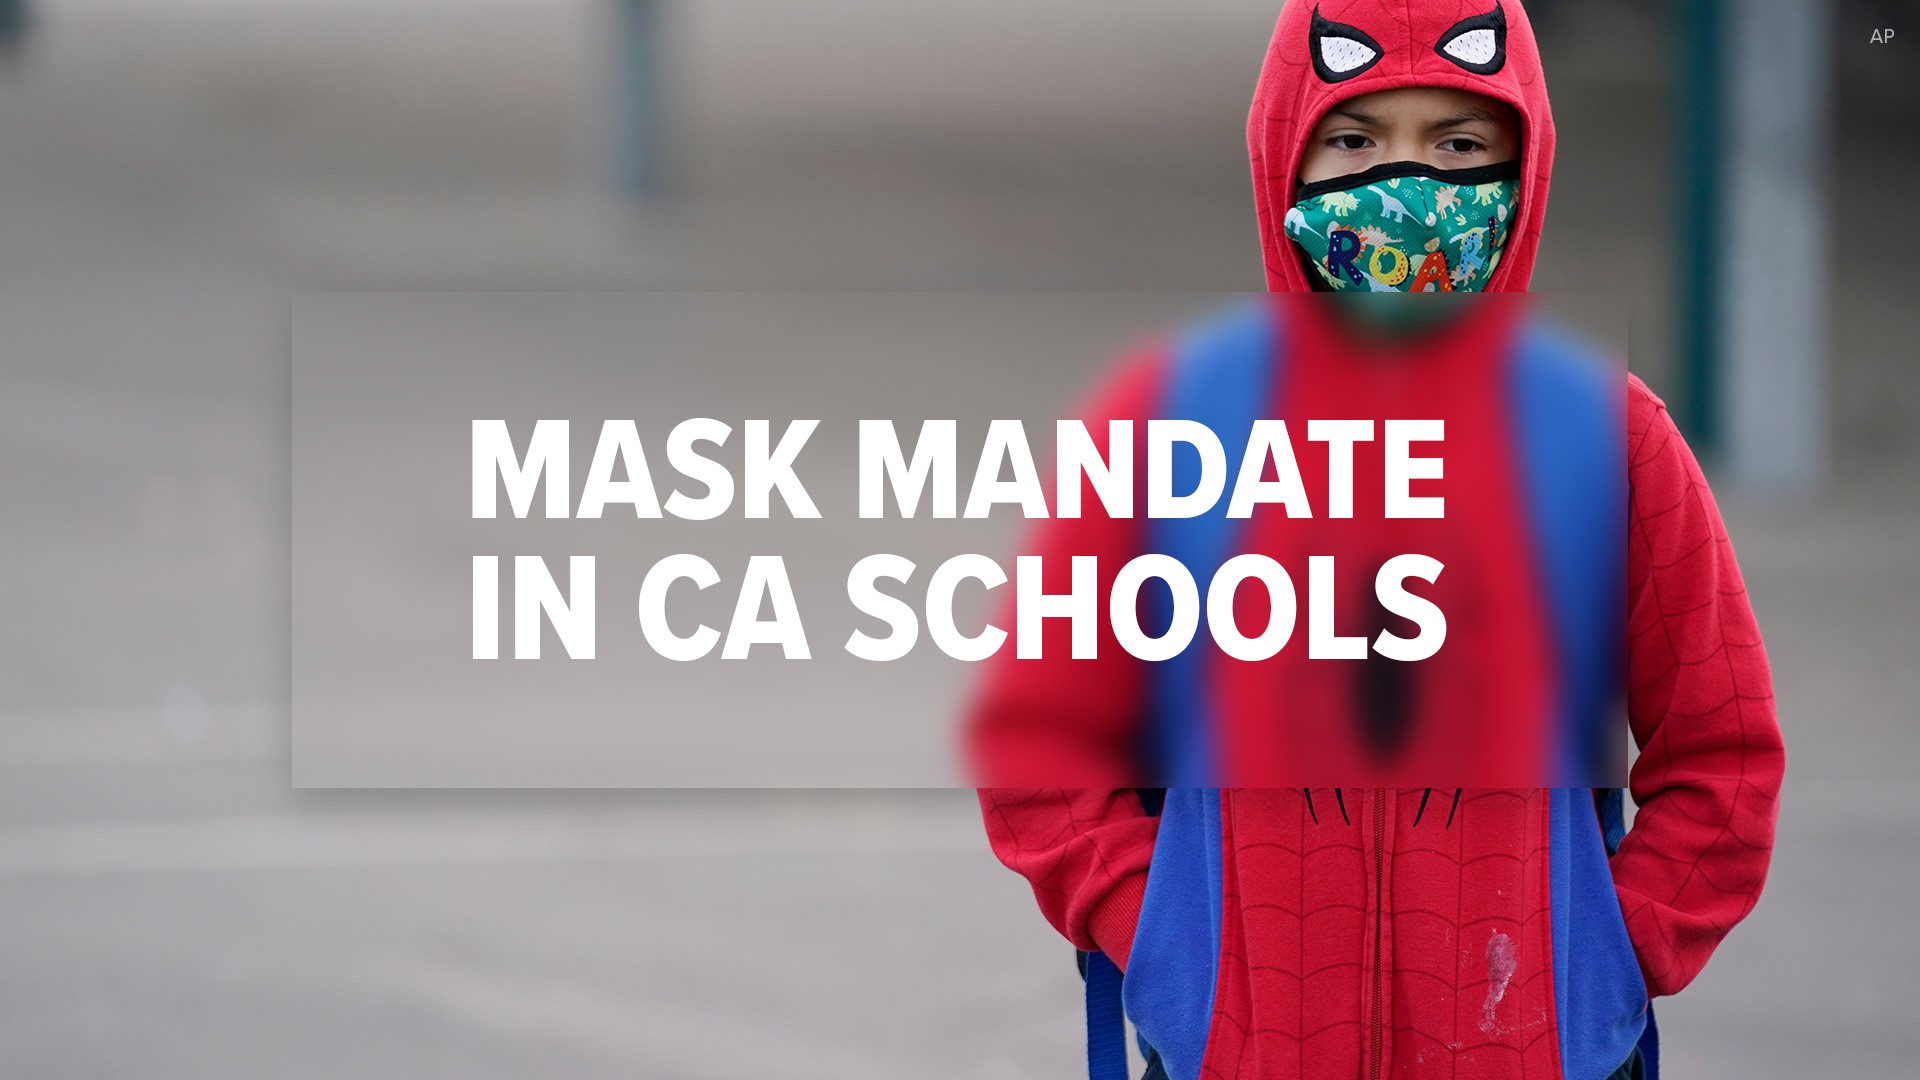 California is considering changing the way it manages masks in schools, it just won’t be announced until at least February 28.